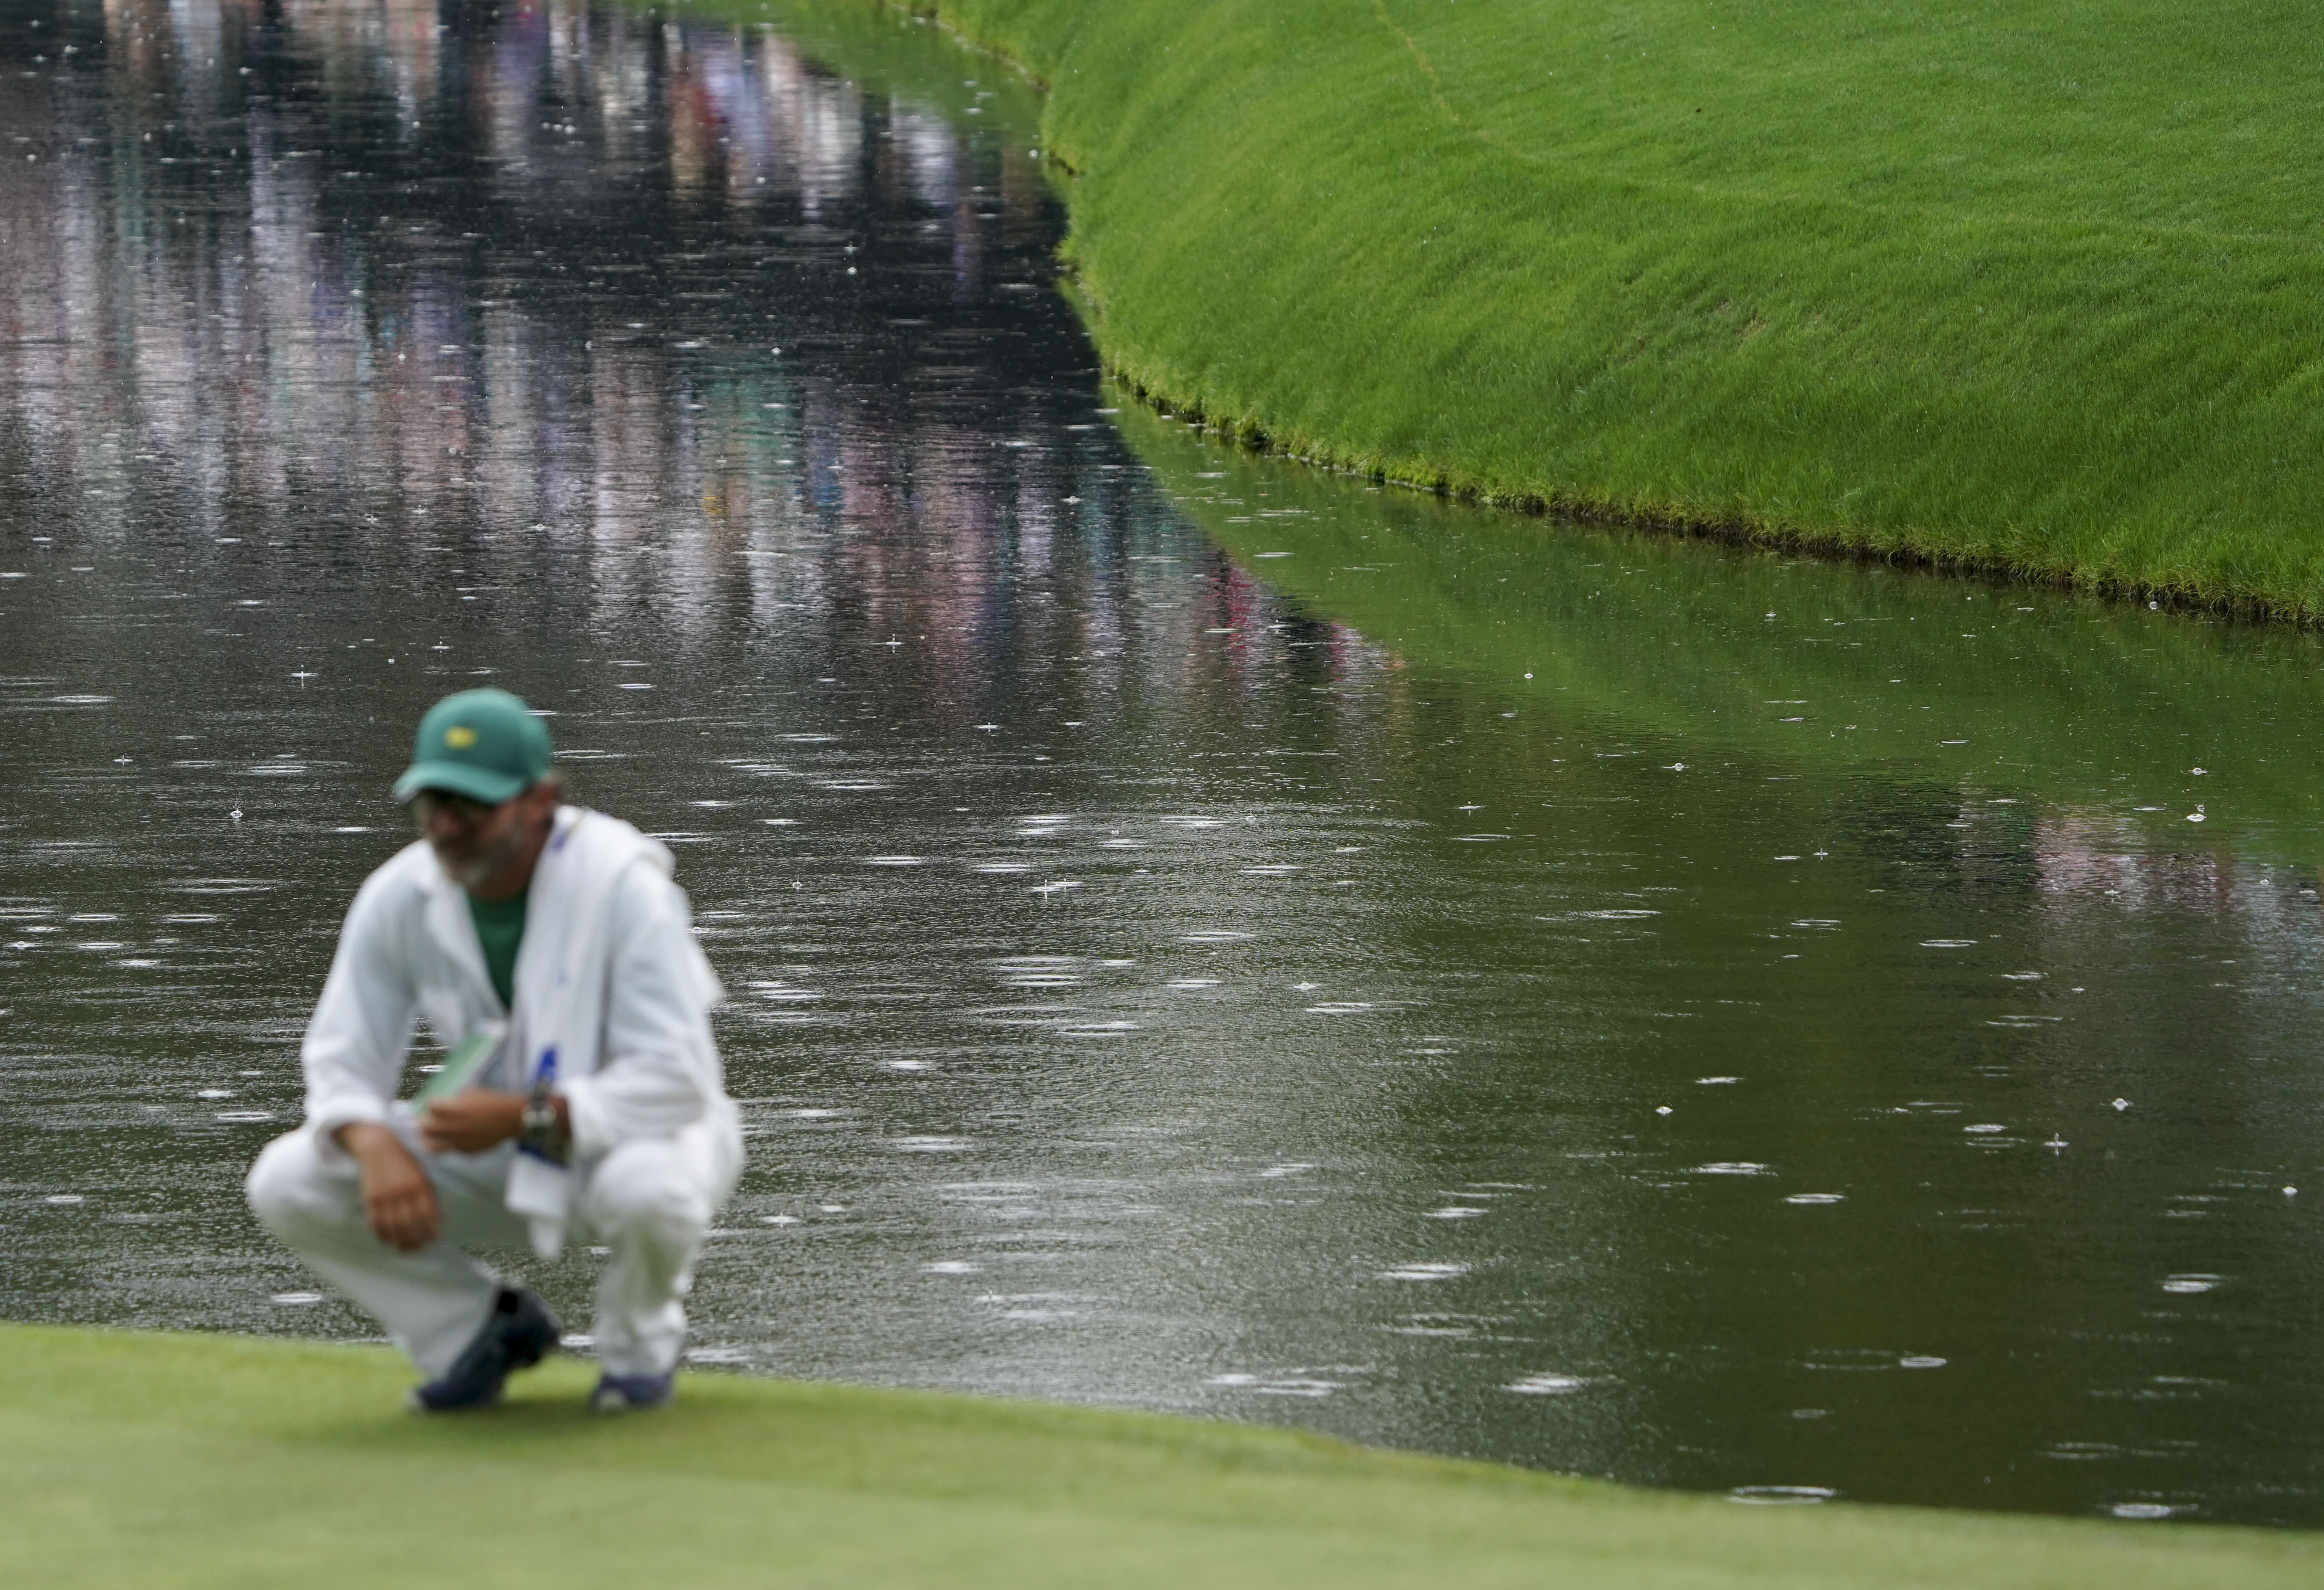 Corey Conners caddie surveys the no. 16 green as rain hits the pond behind him during the second round of The Masters golf tournament.